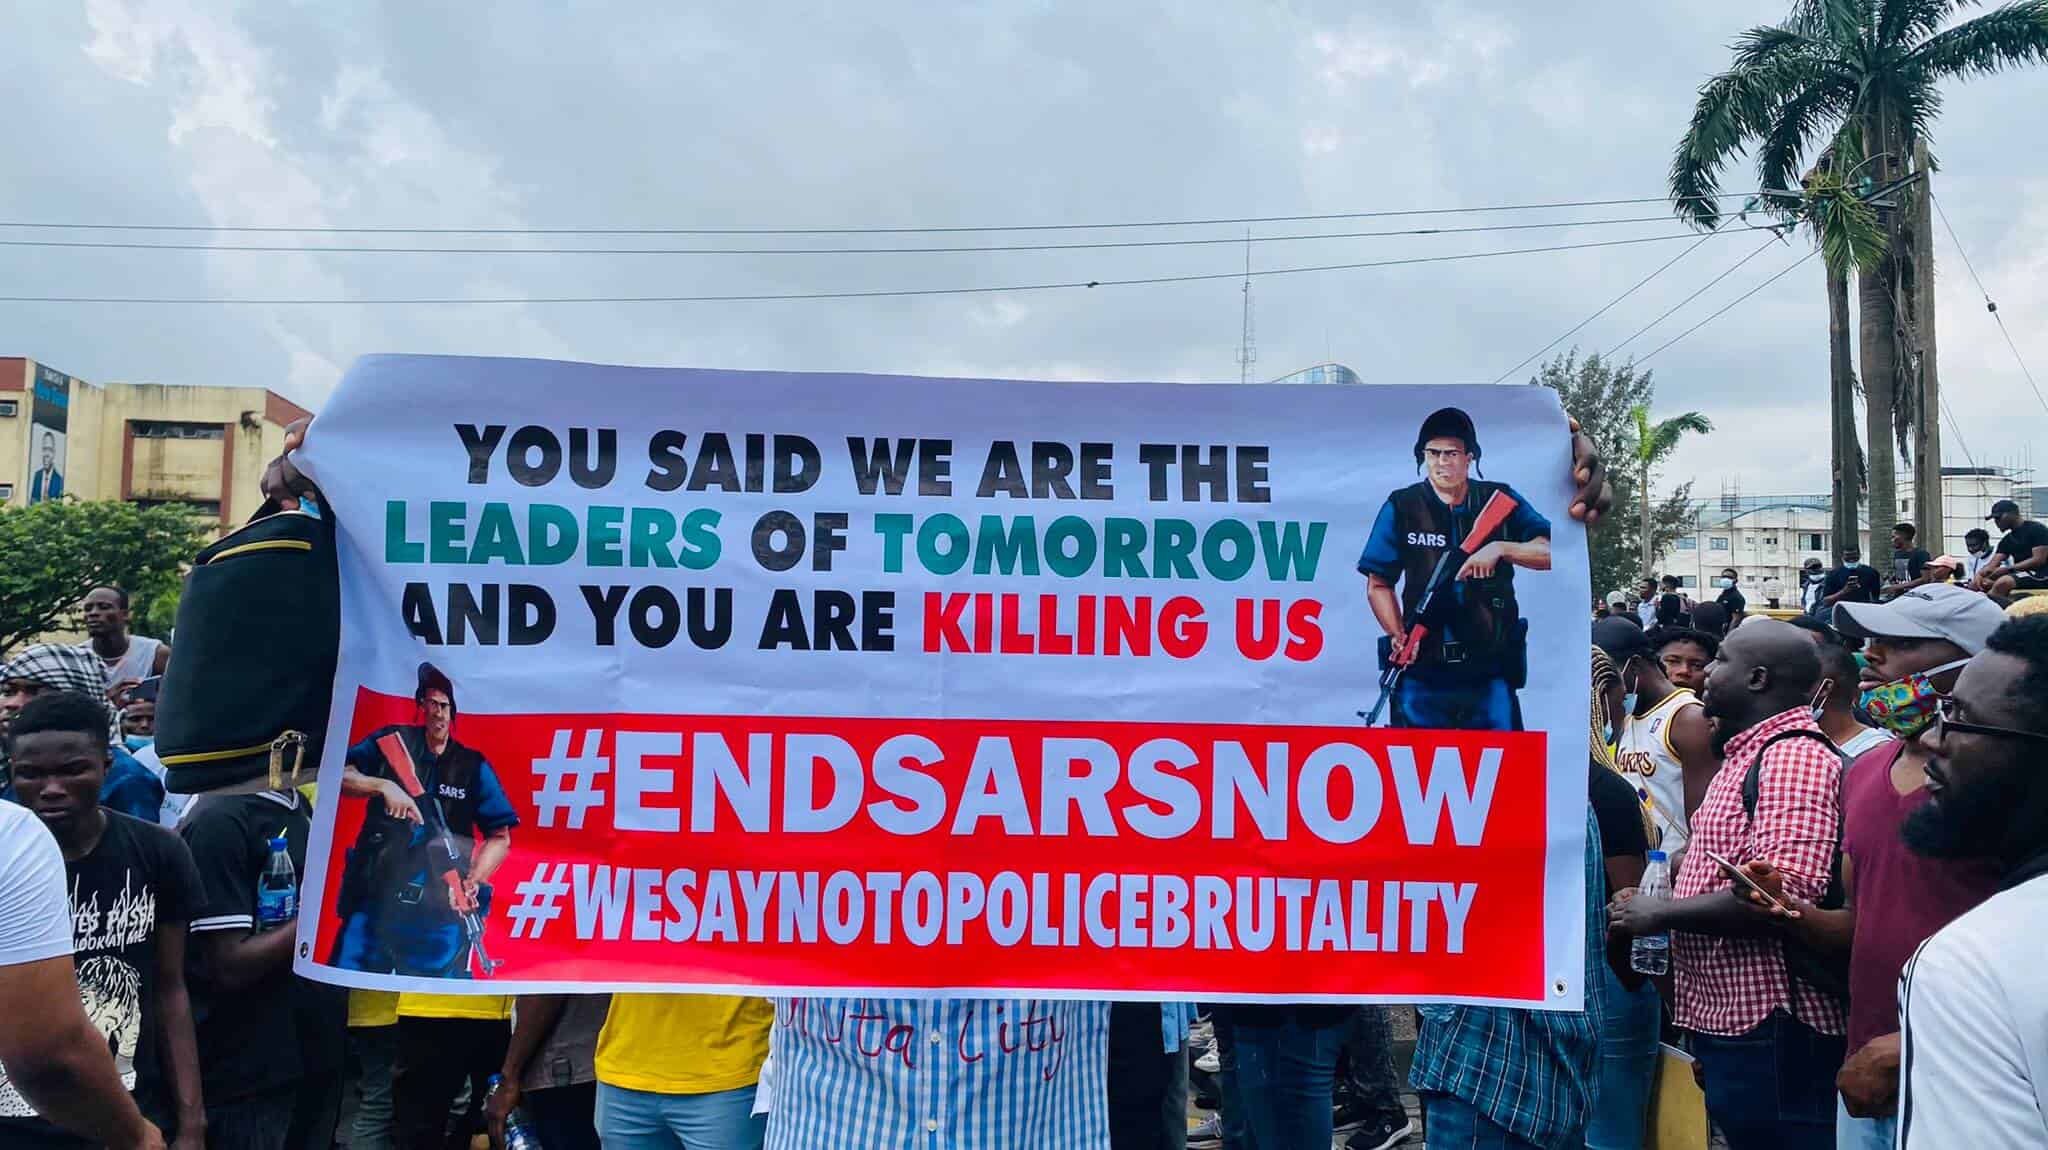 The Nigerian police respond to #EndSARS protests with brutality